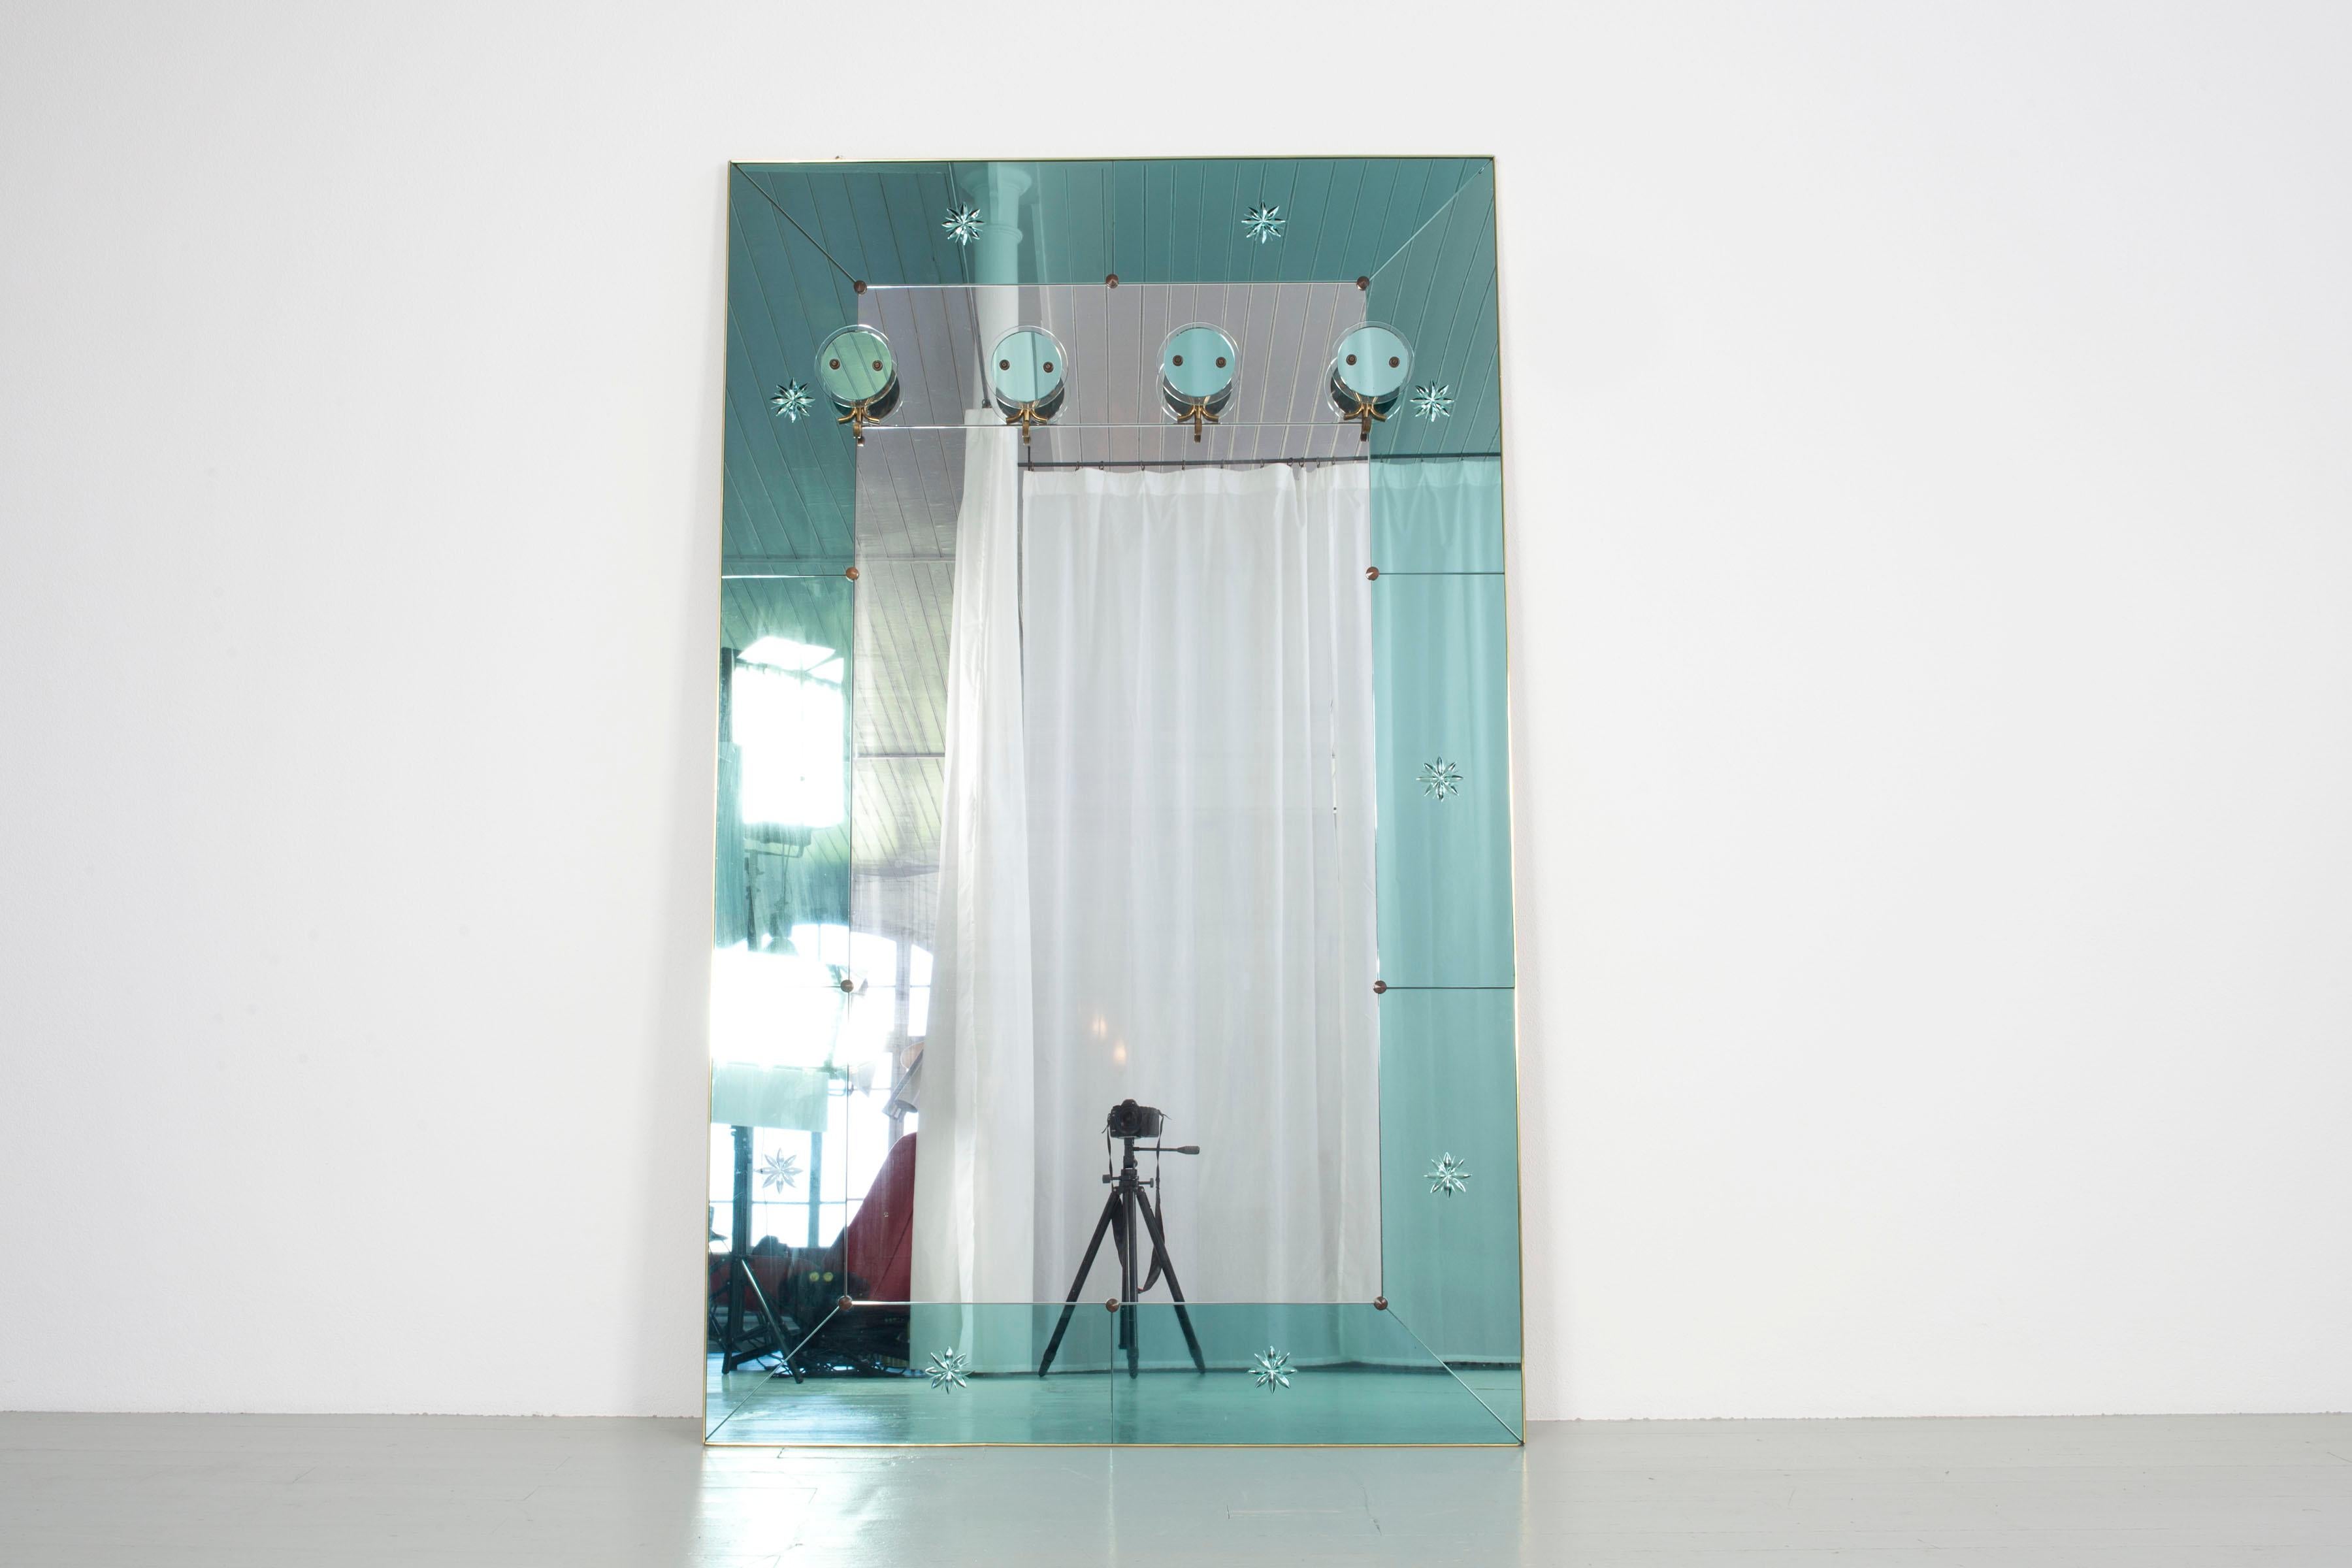 Big, extravagant wardrobe with original old turquoise-colored mirrors and hooks made of glass from Italy, 1950. The wardrobe is made of a mirror, framed by turquoise-colored glass, which is decorated with starlike engravings. The hooks are made of